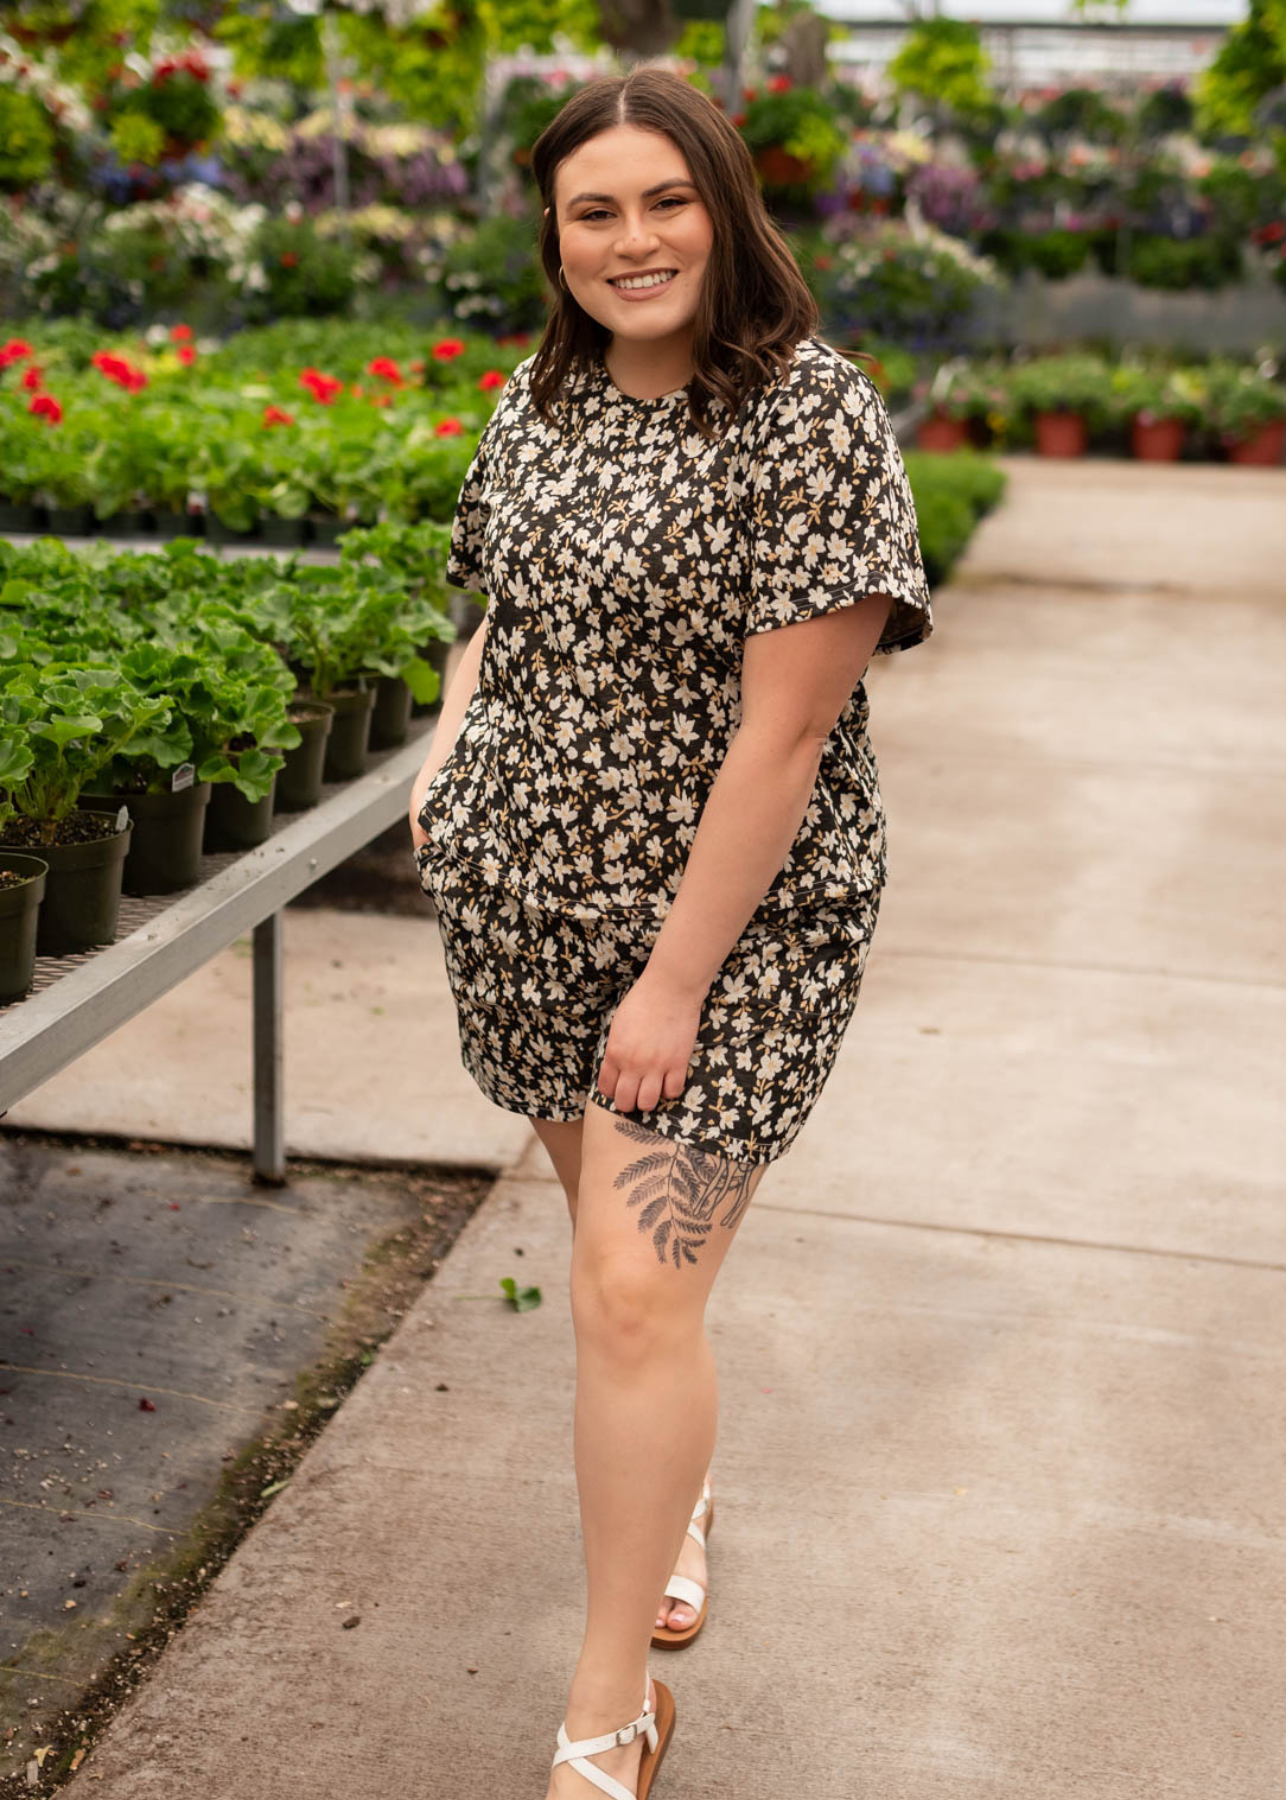 Plus size black floral top with black floral shorts sold separately 